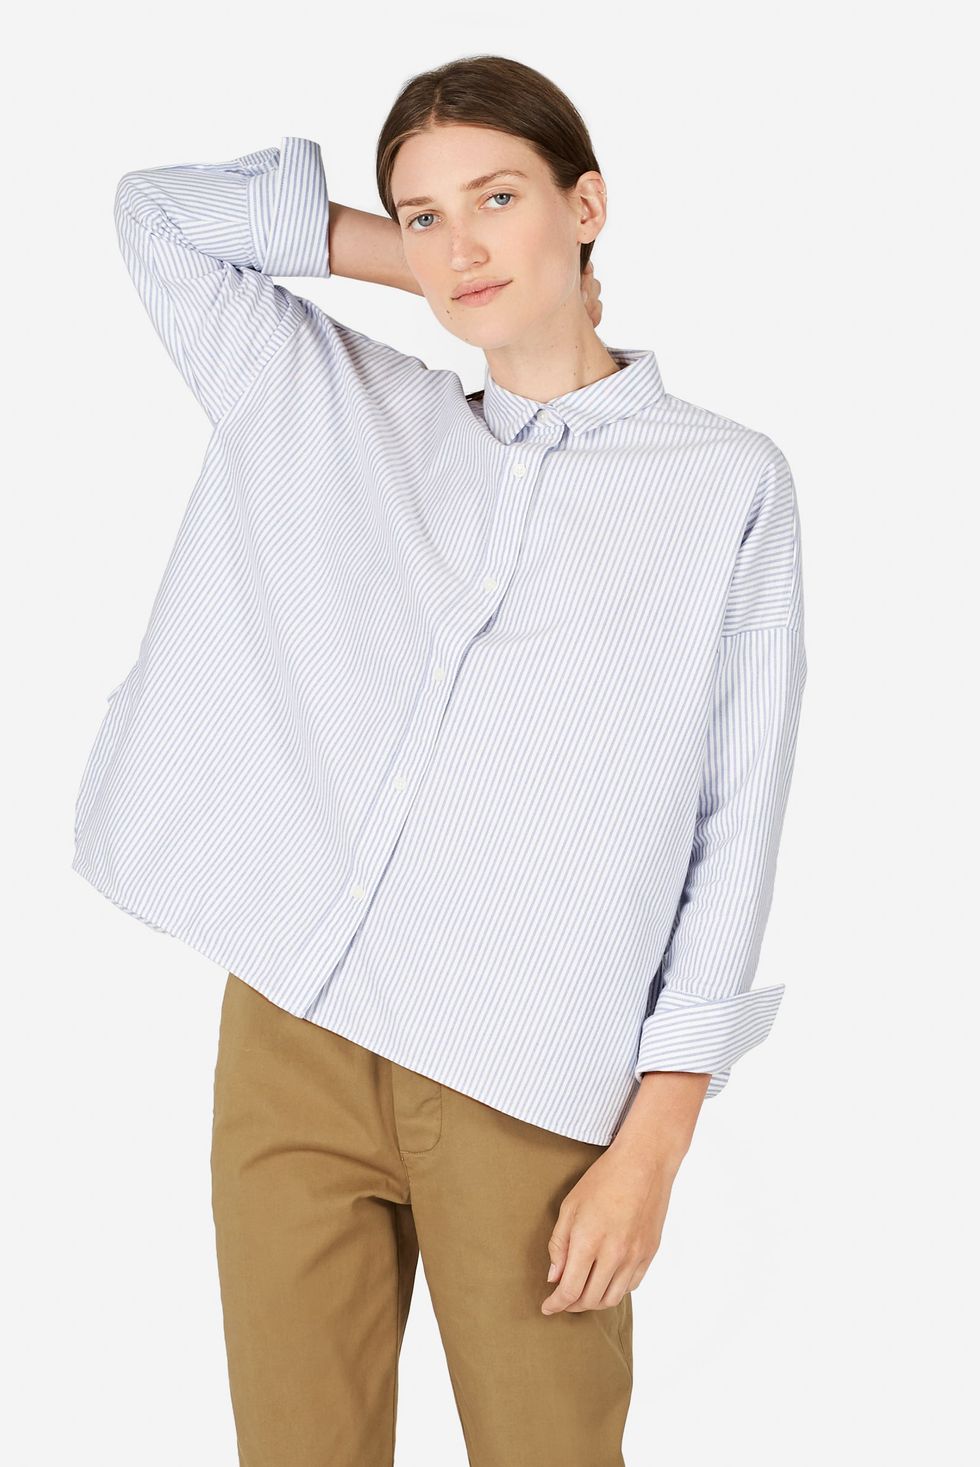 The Japanese Oxford Square Shirt